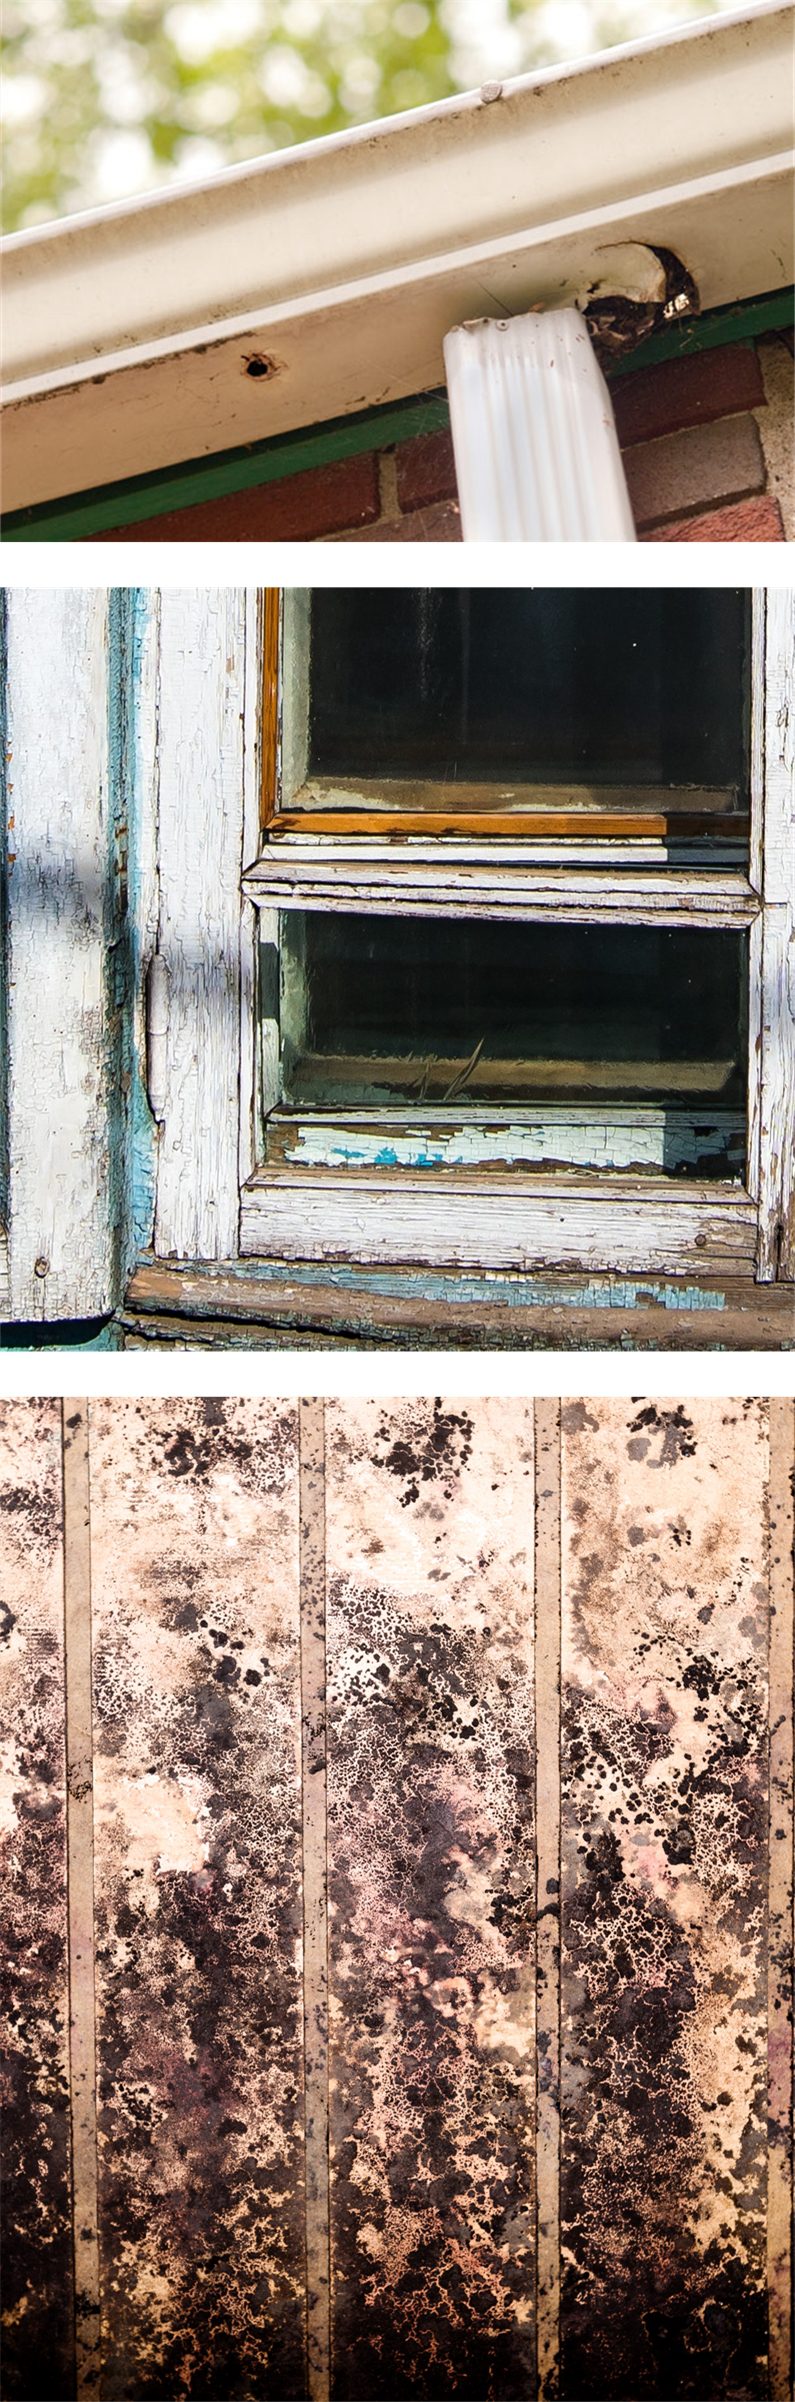 collage of 3 photos including old, damaged eavestrough with peeling paint and rusting, rotting window frame, and mould damage inside a home from water leaks